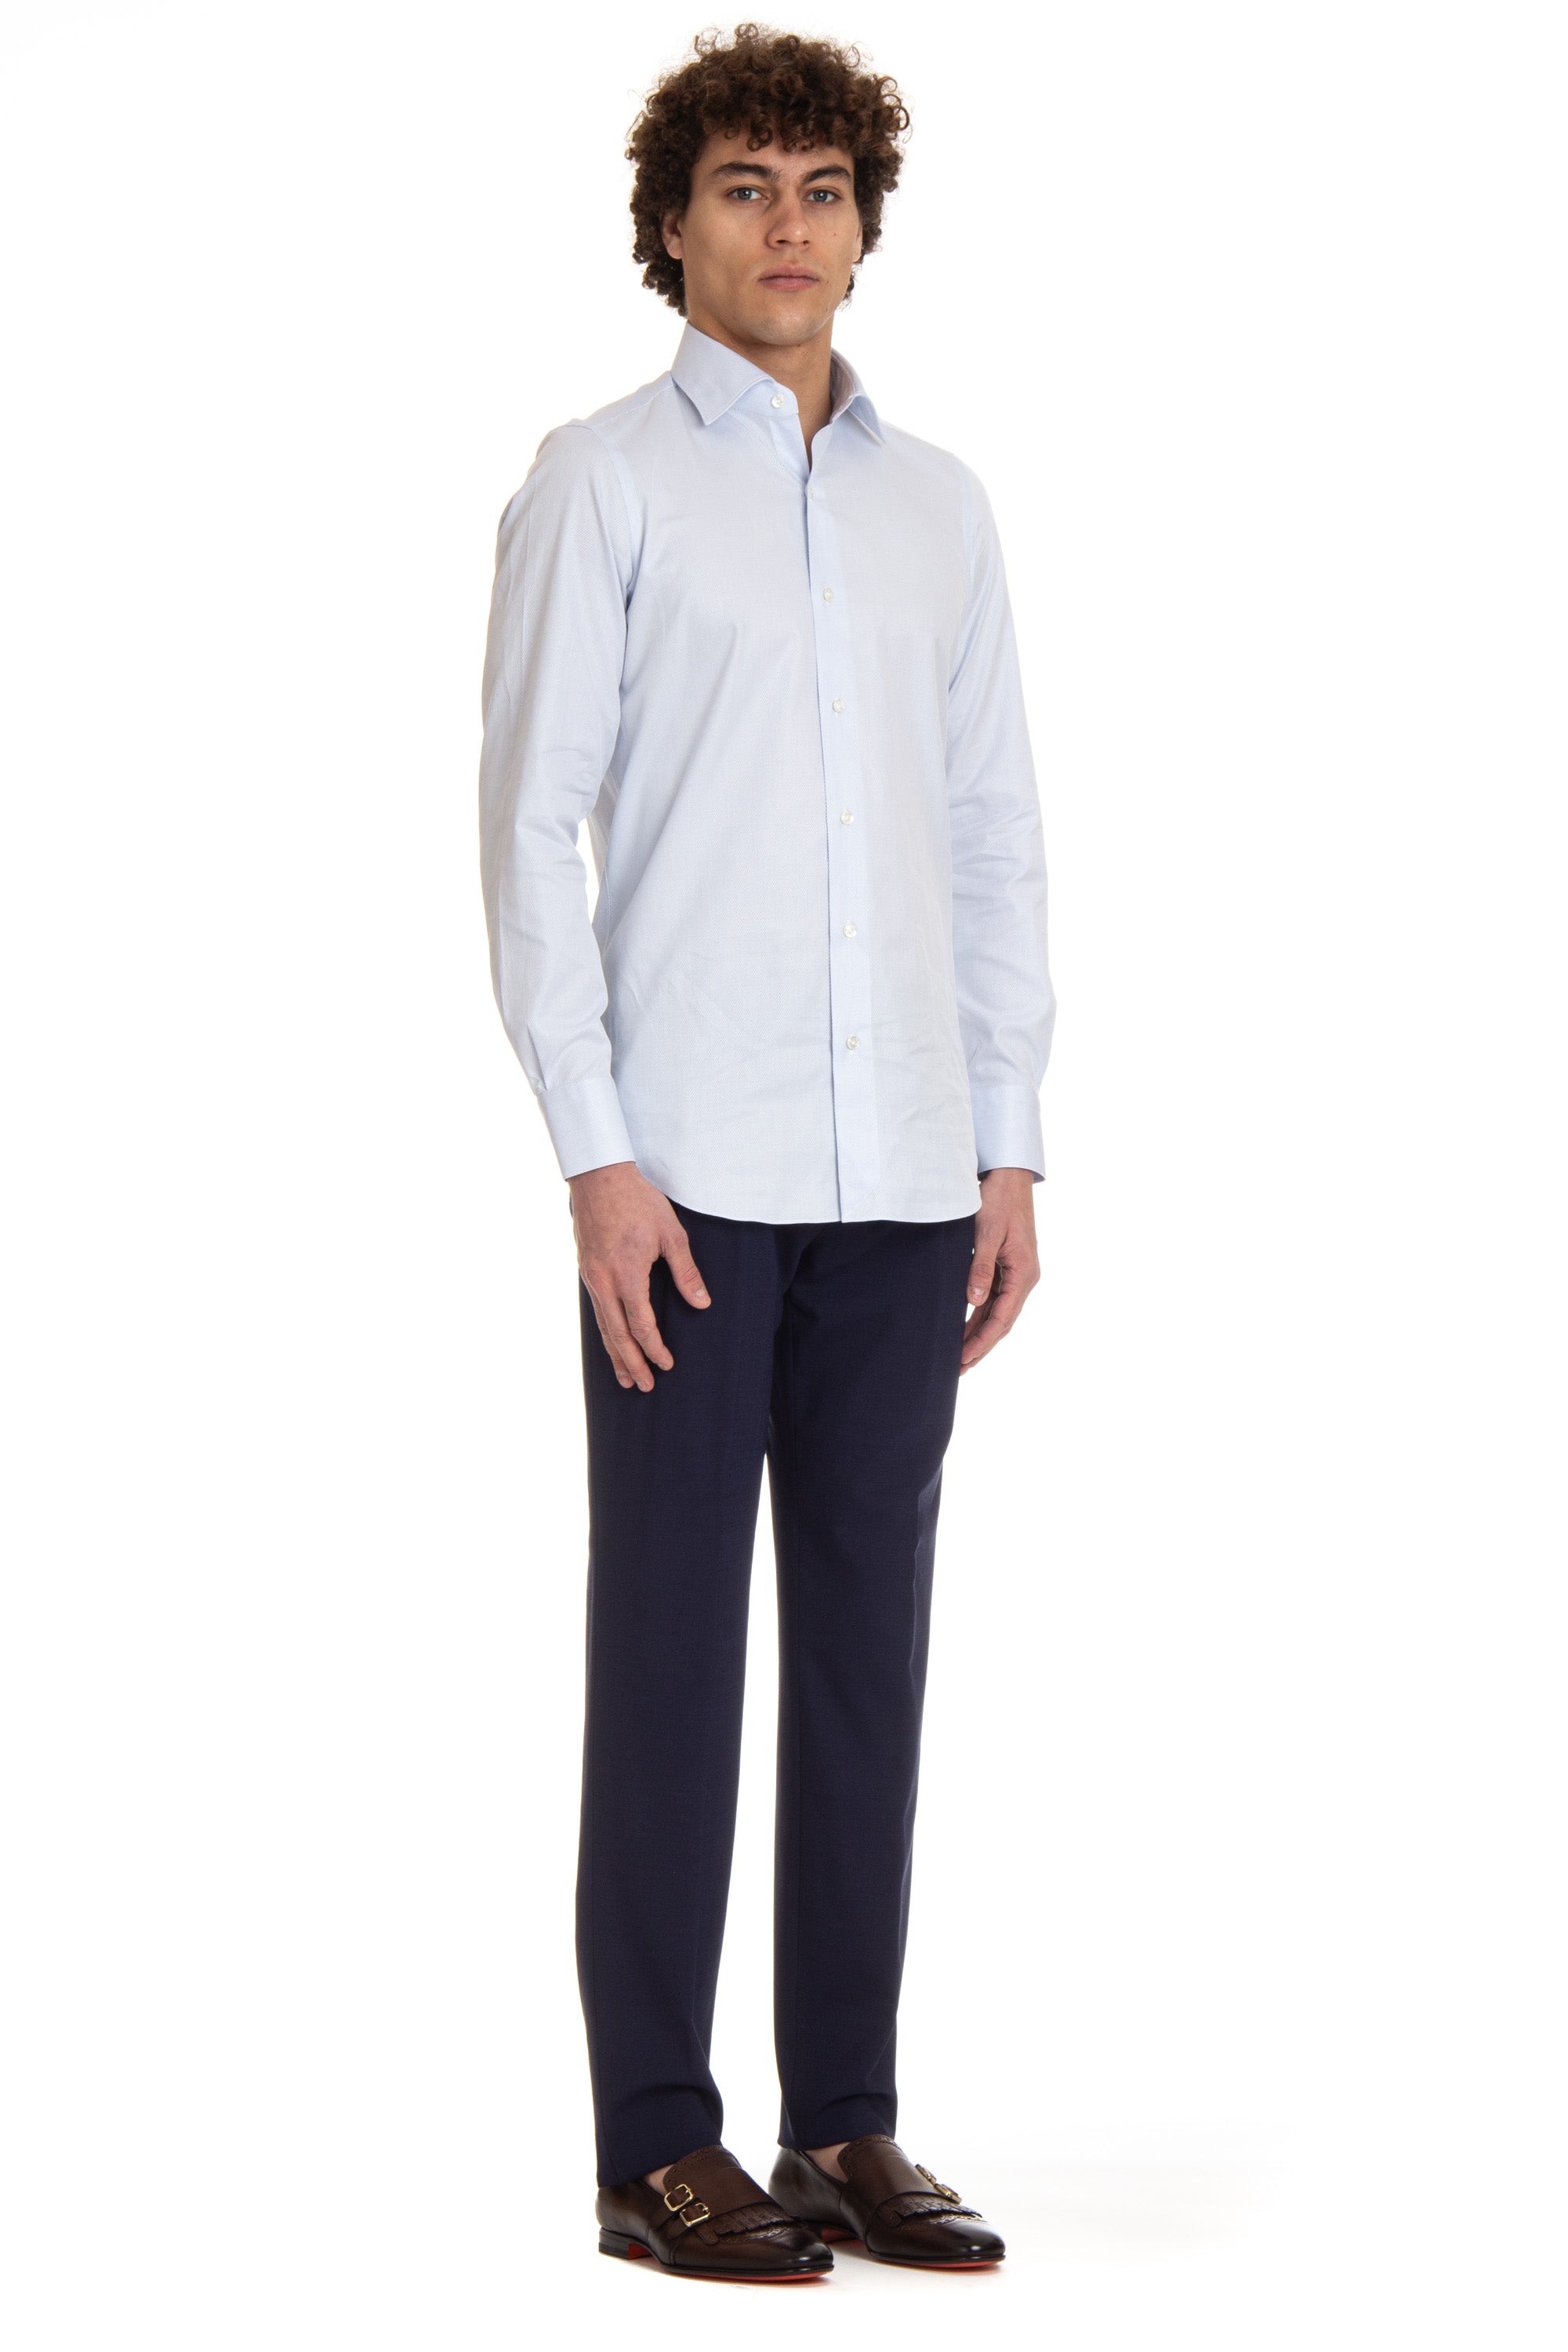 Tailored woven shirt from the Milan line